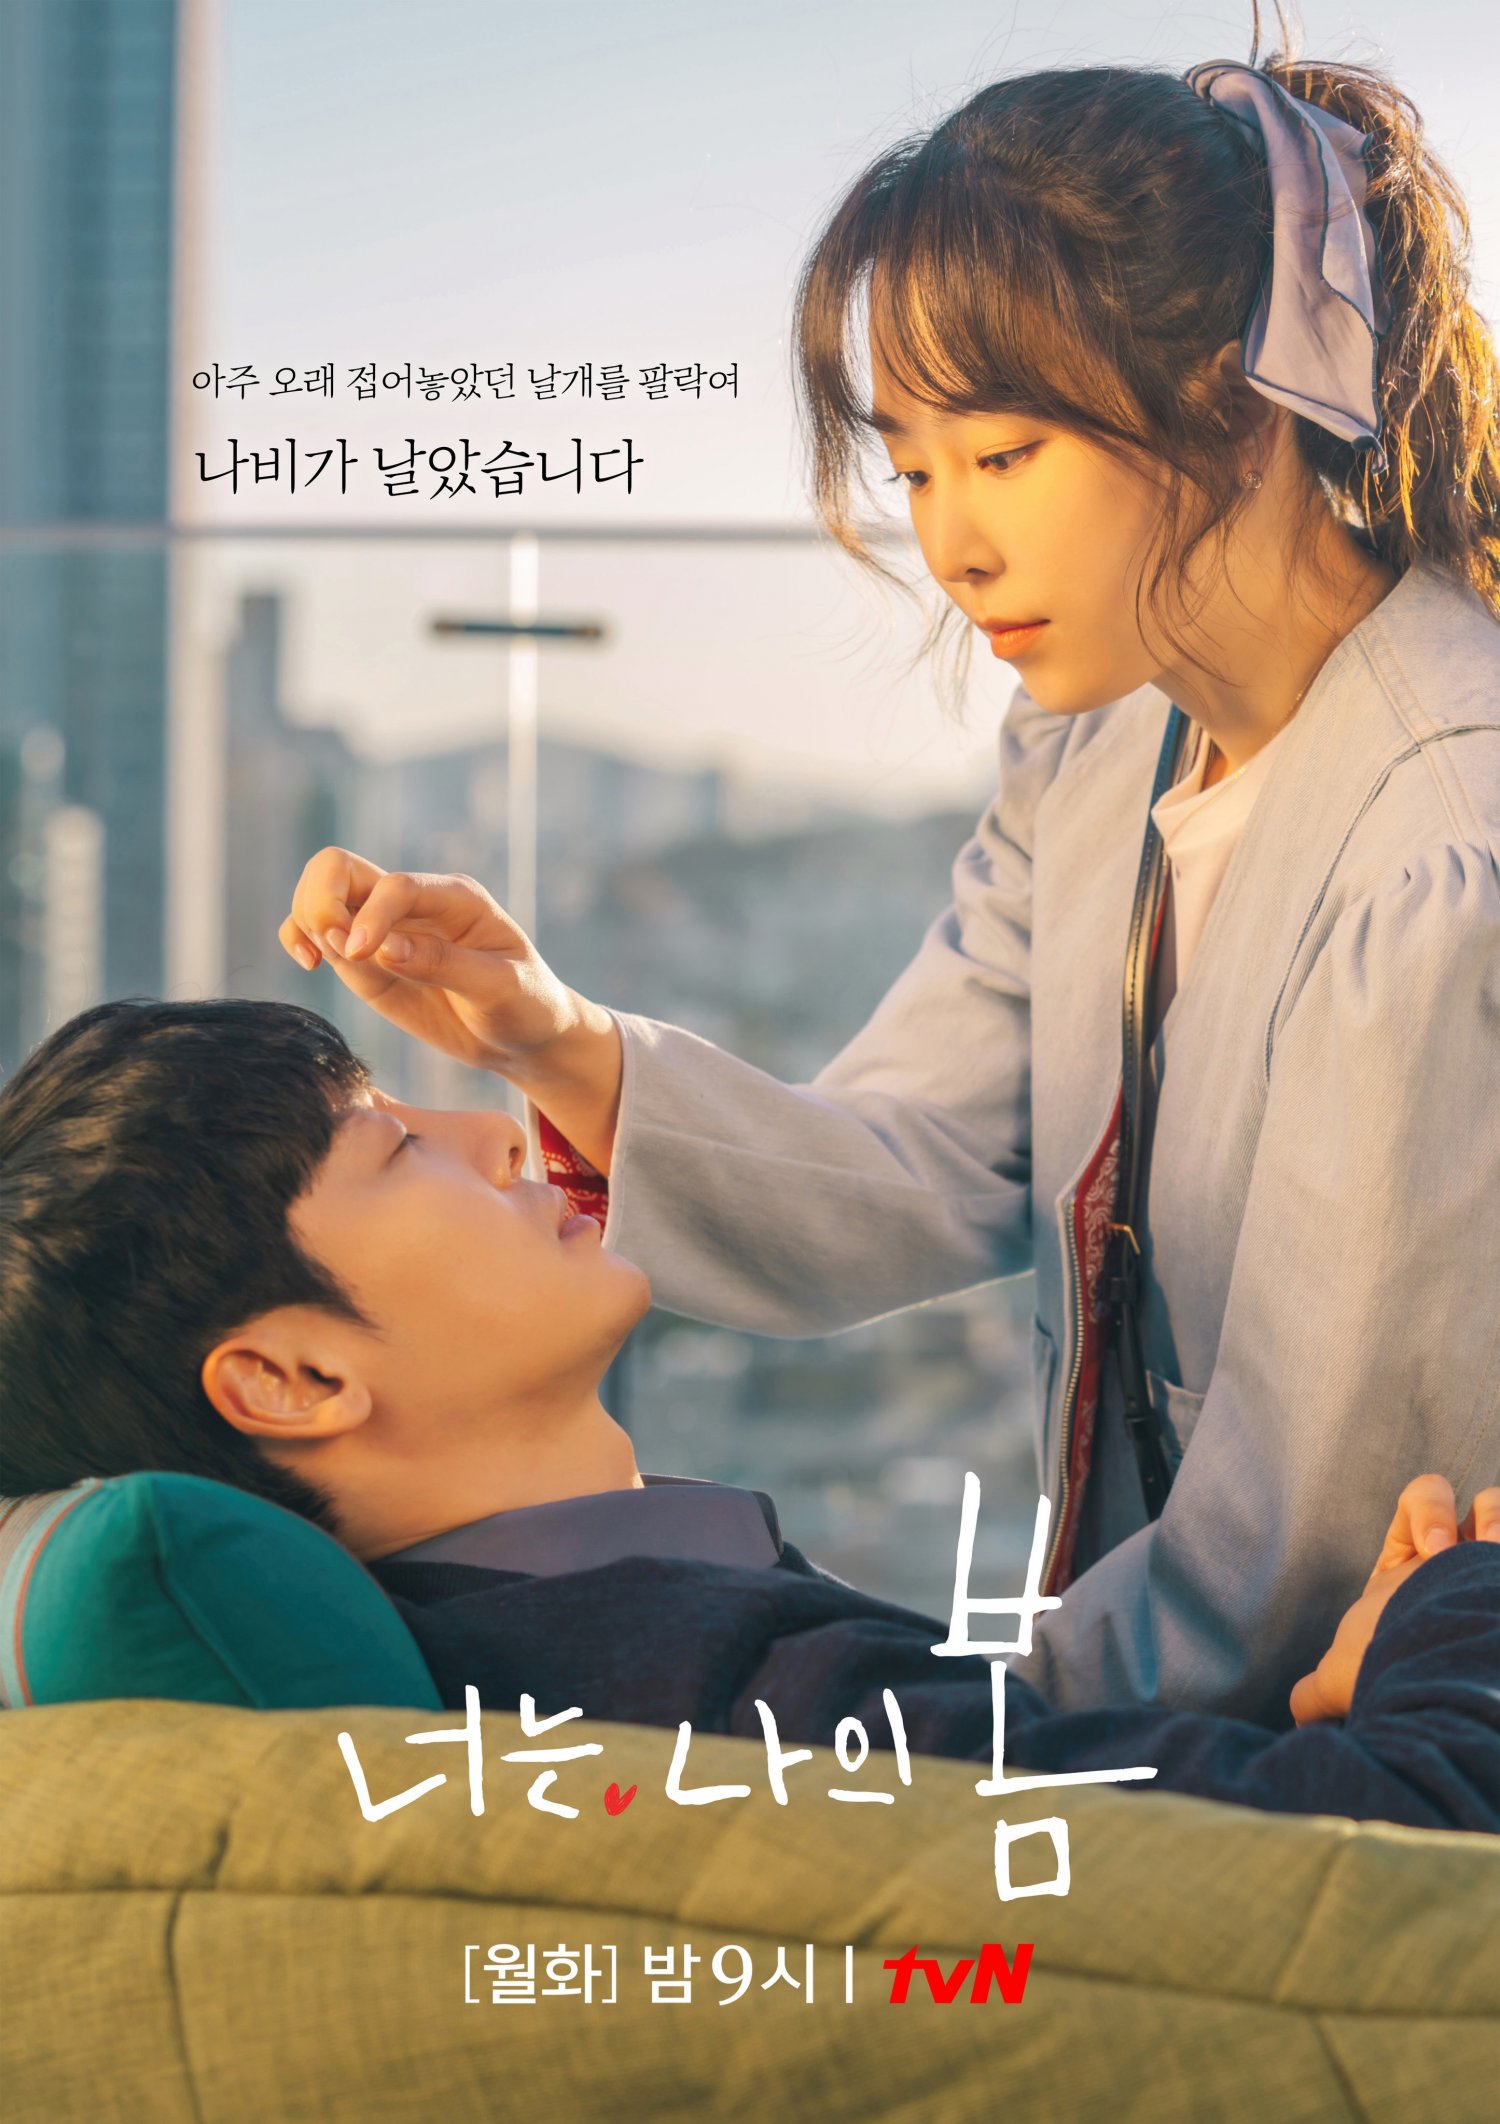 You Are My Spring 너는 나의 봄 poster - 5 Underrated Korean Dramas You Shouldn’t Have Missed